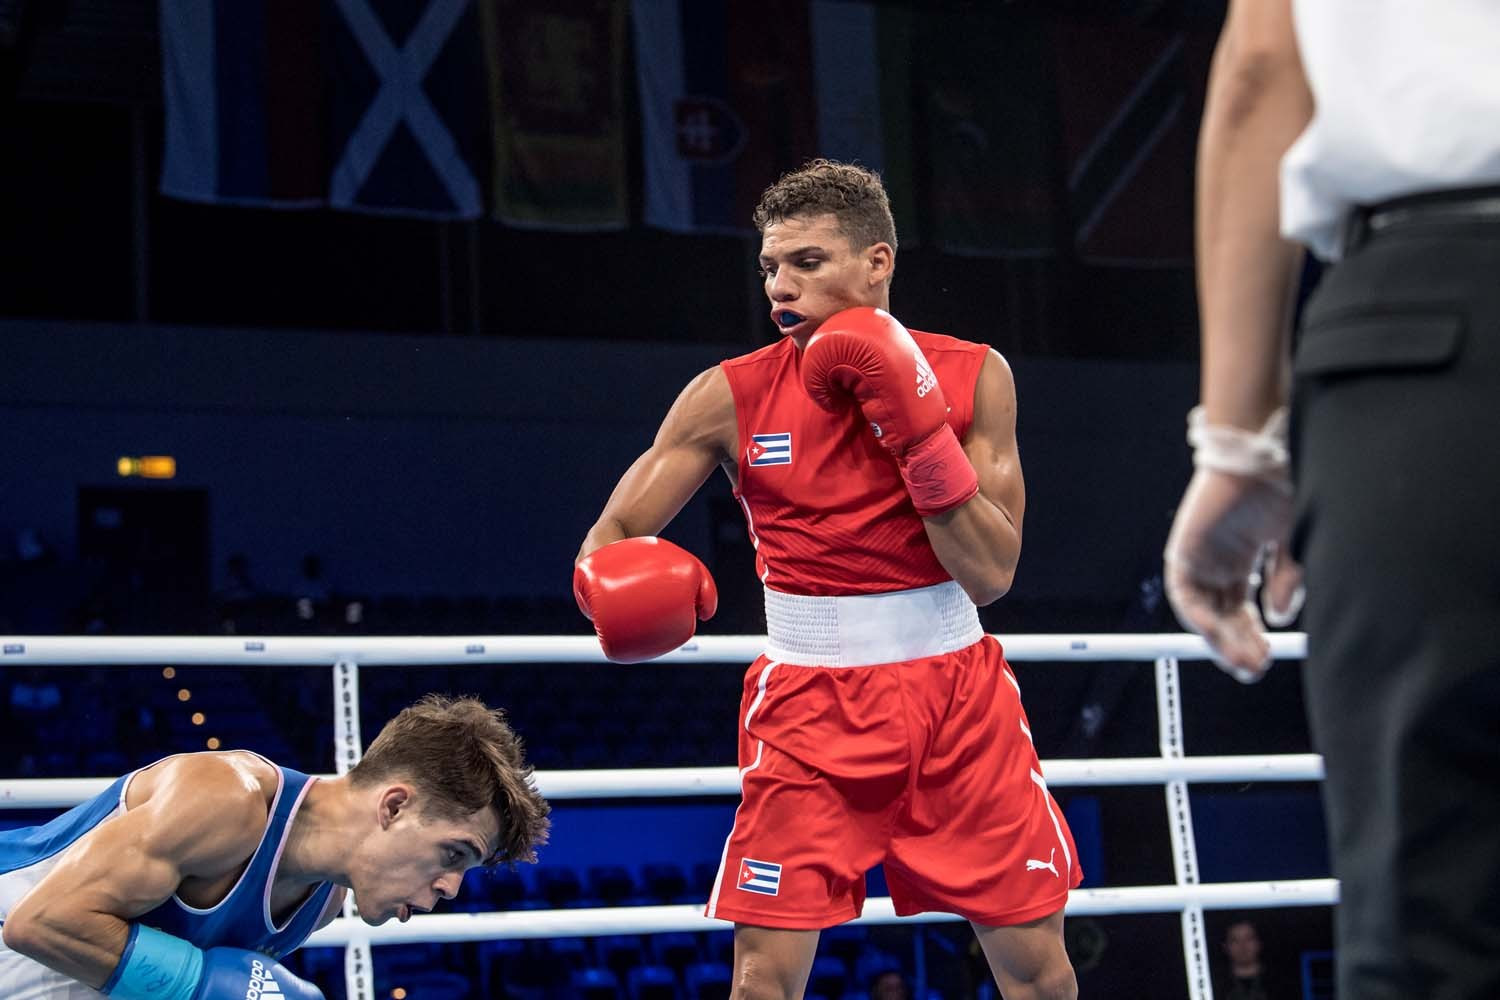 Cuba's Yosbany Veitia proved too strong for Spain's Gabriel Escobar in their flyweight quarter-final ©AIBA